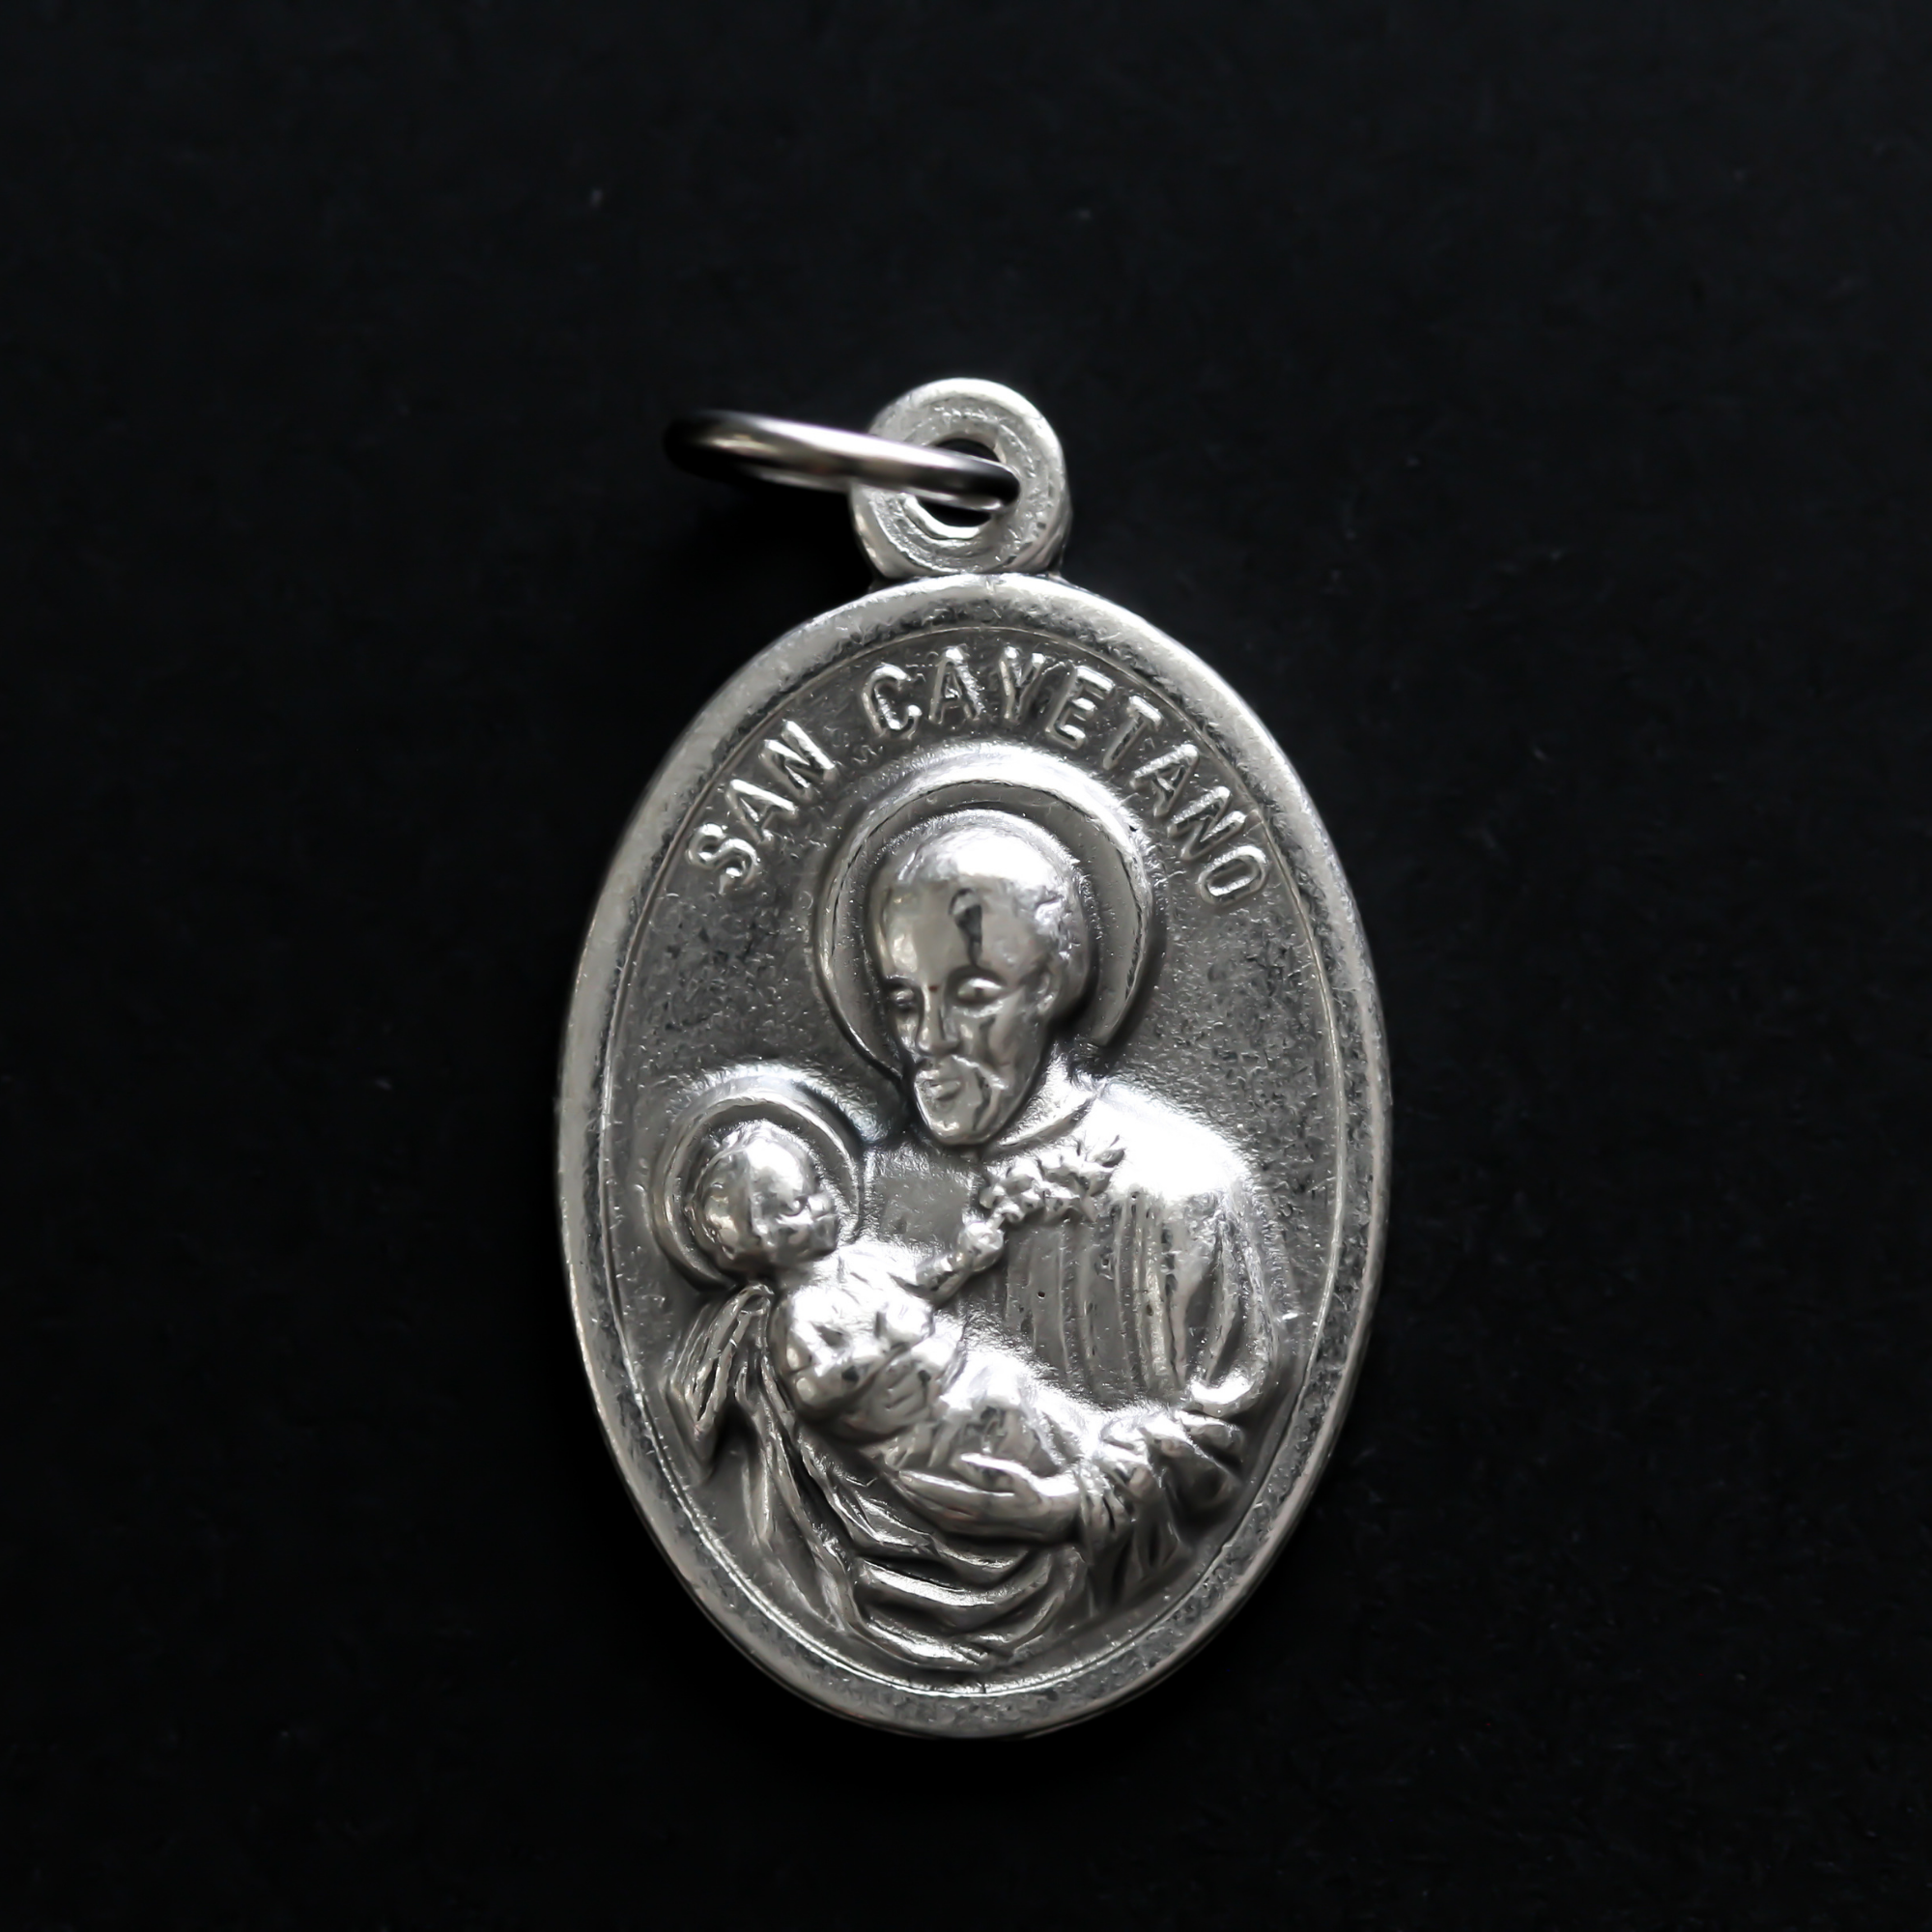 St. Cajetan (Cayetano) oval medal that depicts the saint on the front and "Pan Y Trabajo" on the back which translates from Spanish to "Bread and Labor"